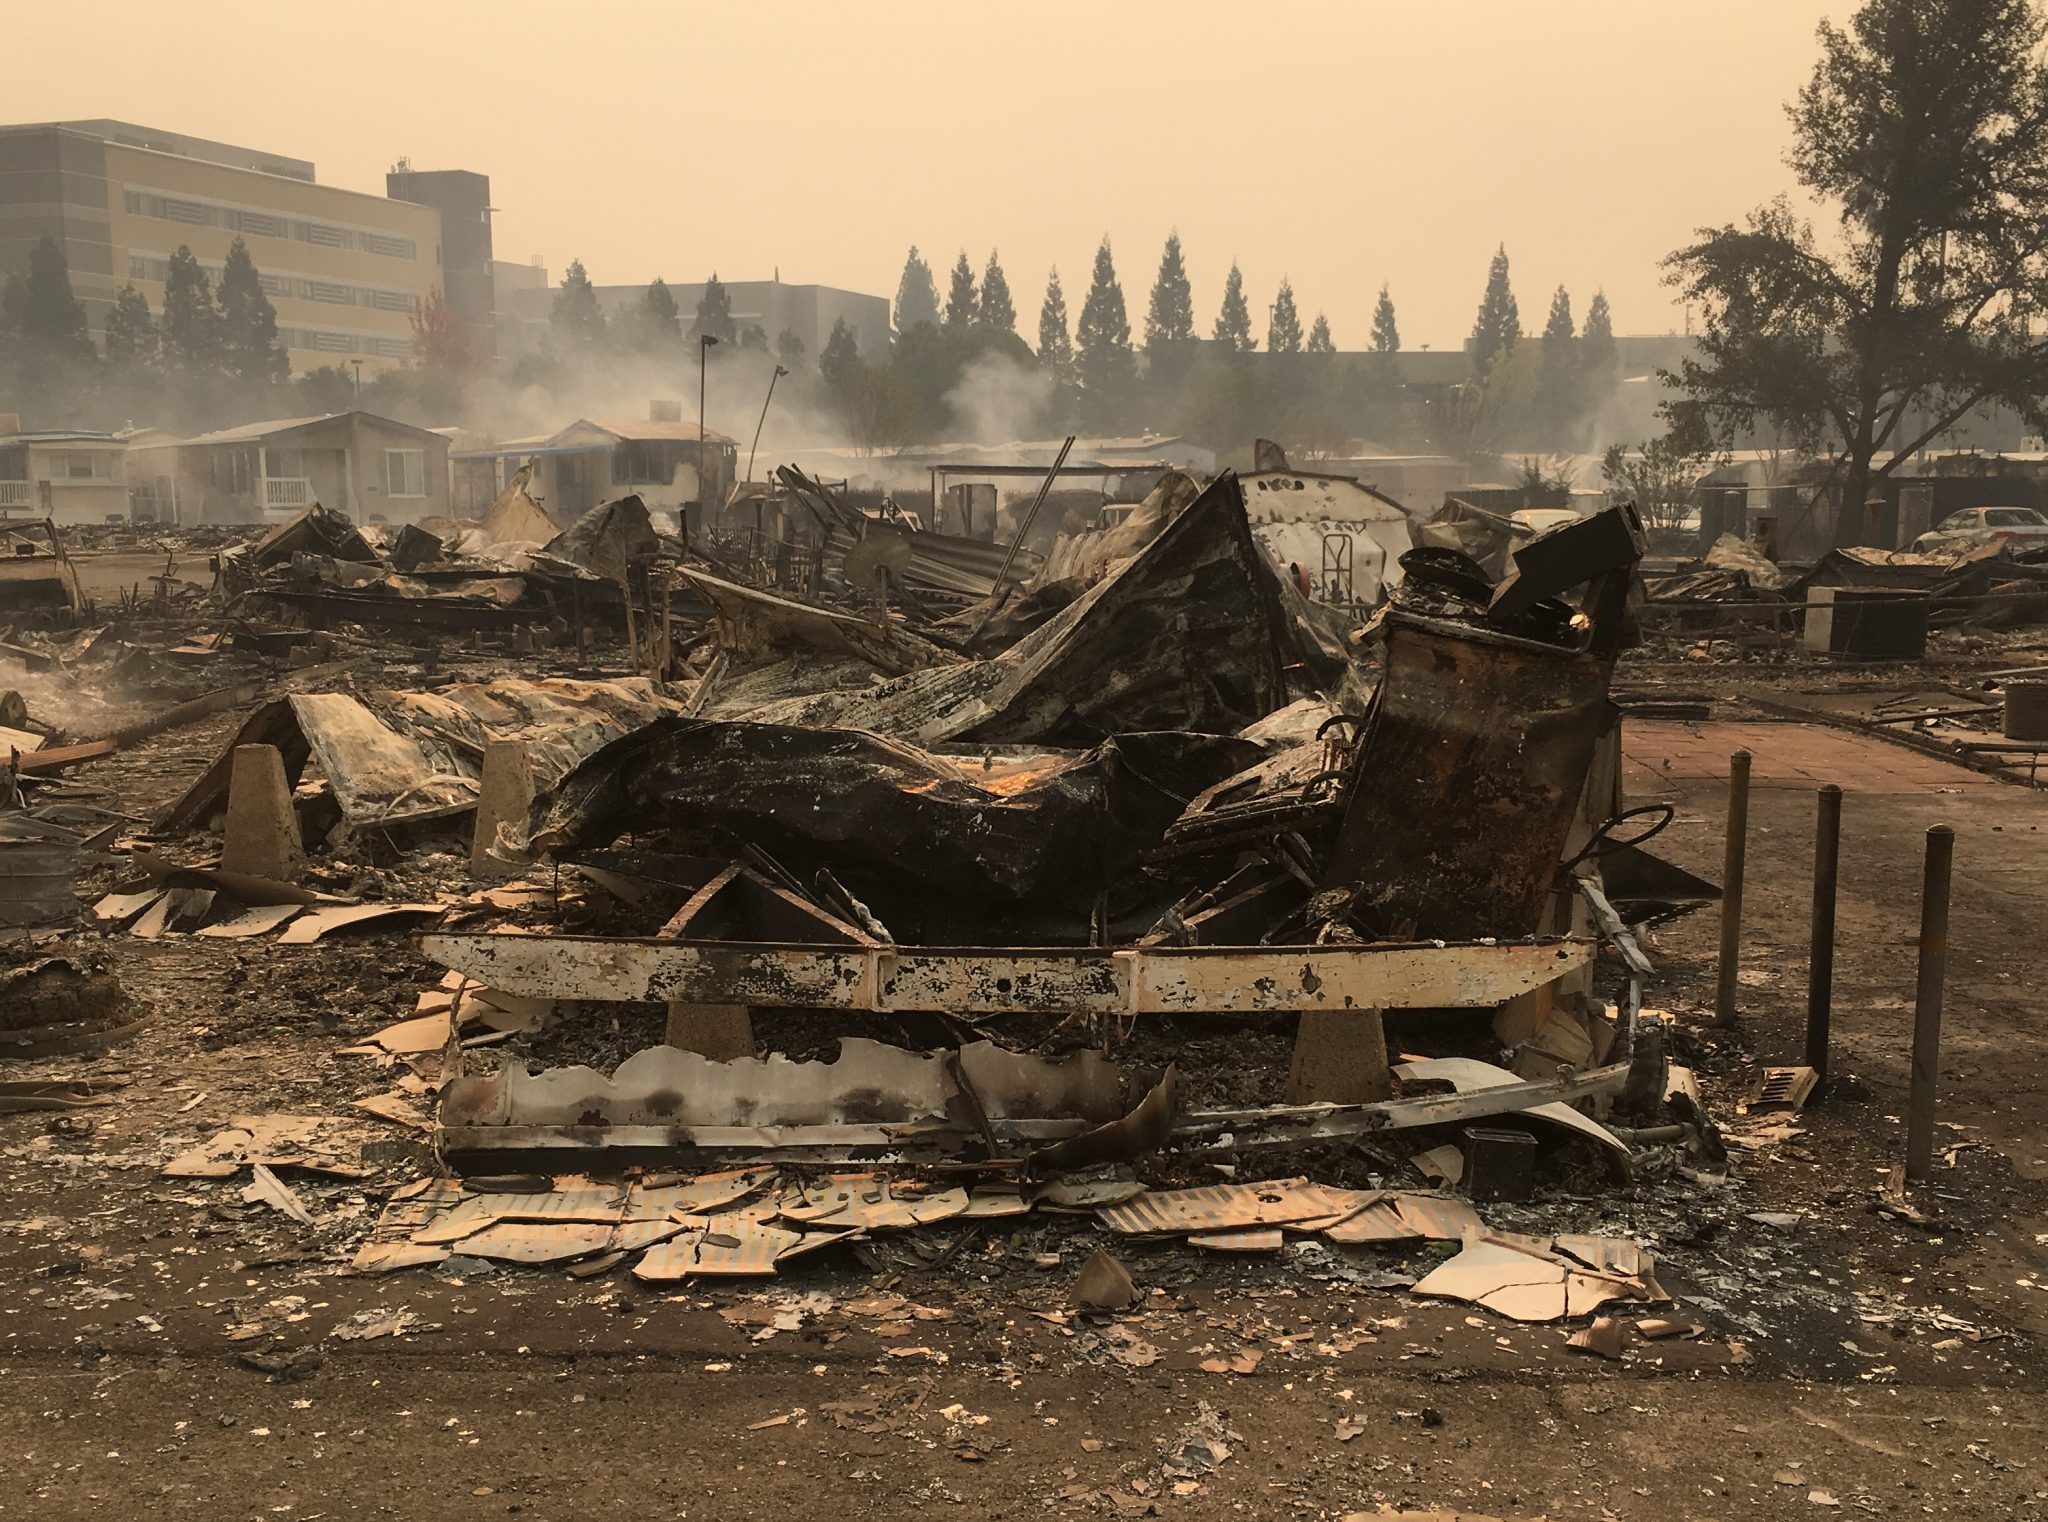 The remains of a mobile home in Santa Rosa smolder during the Tubbs Fire.